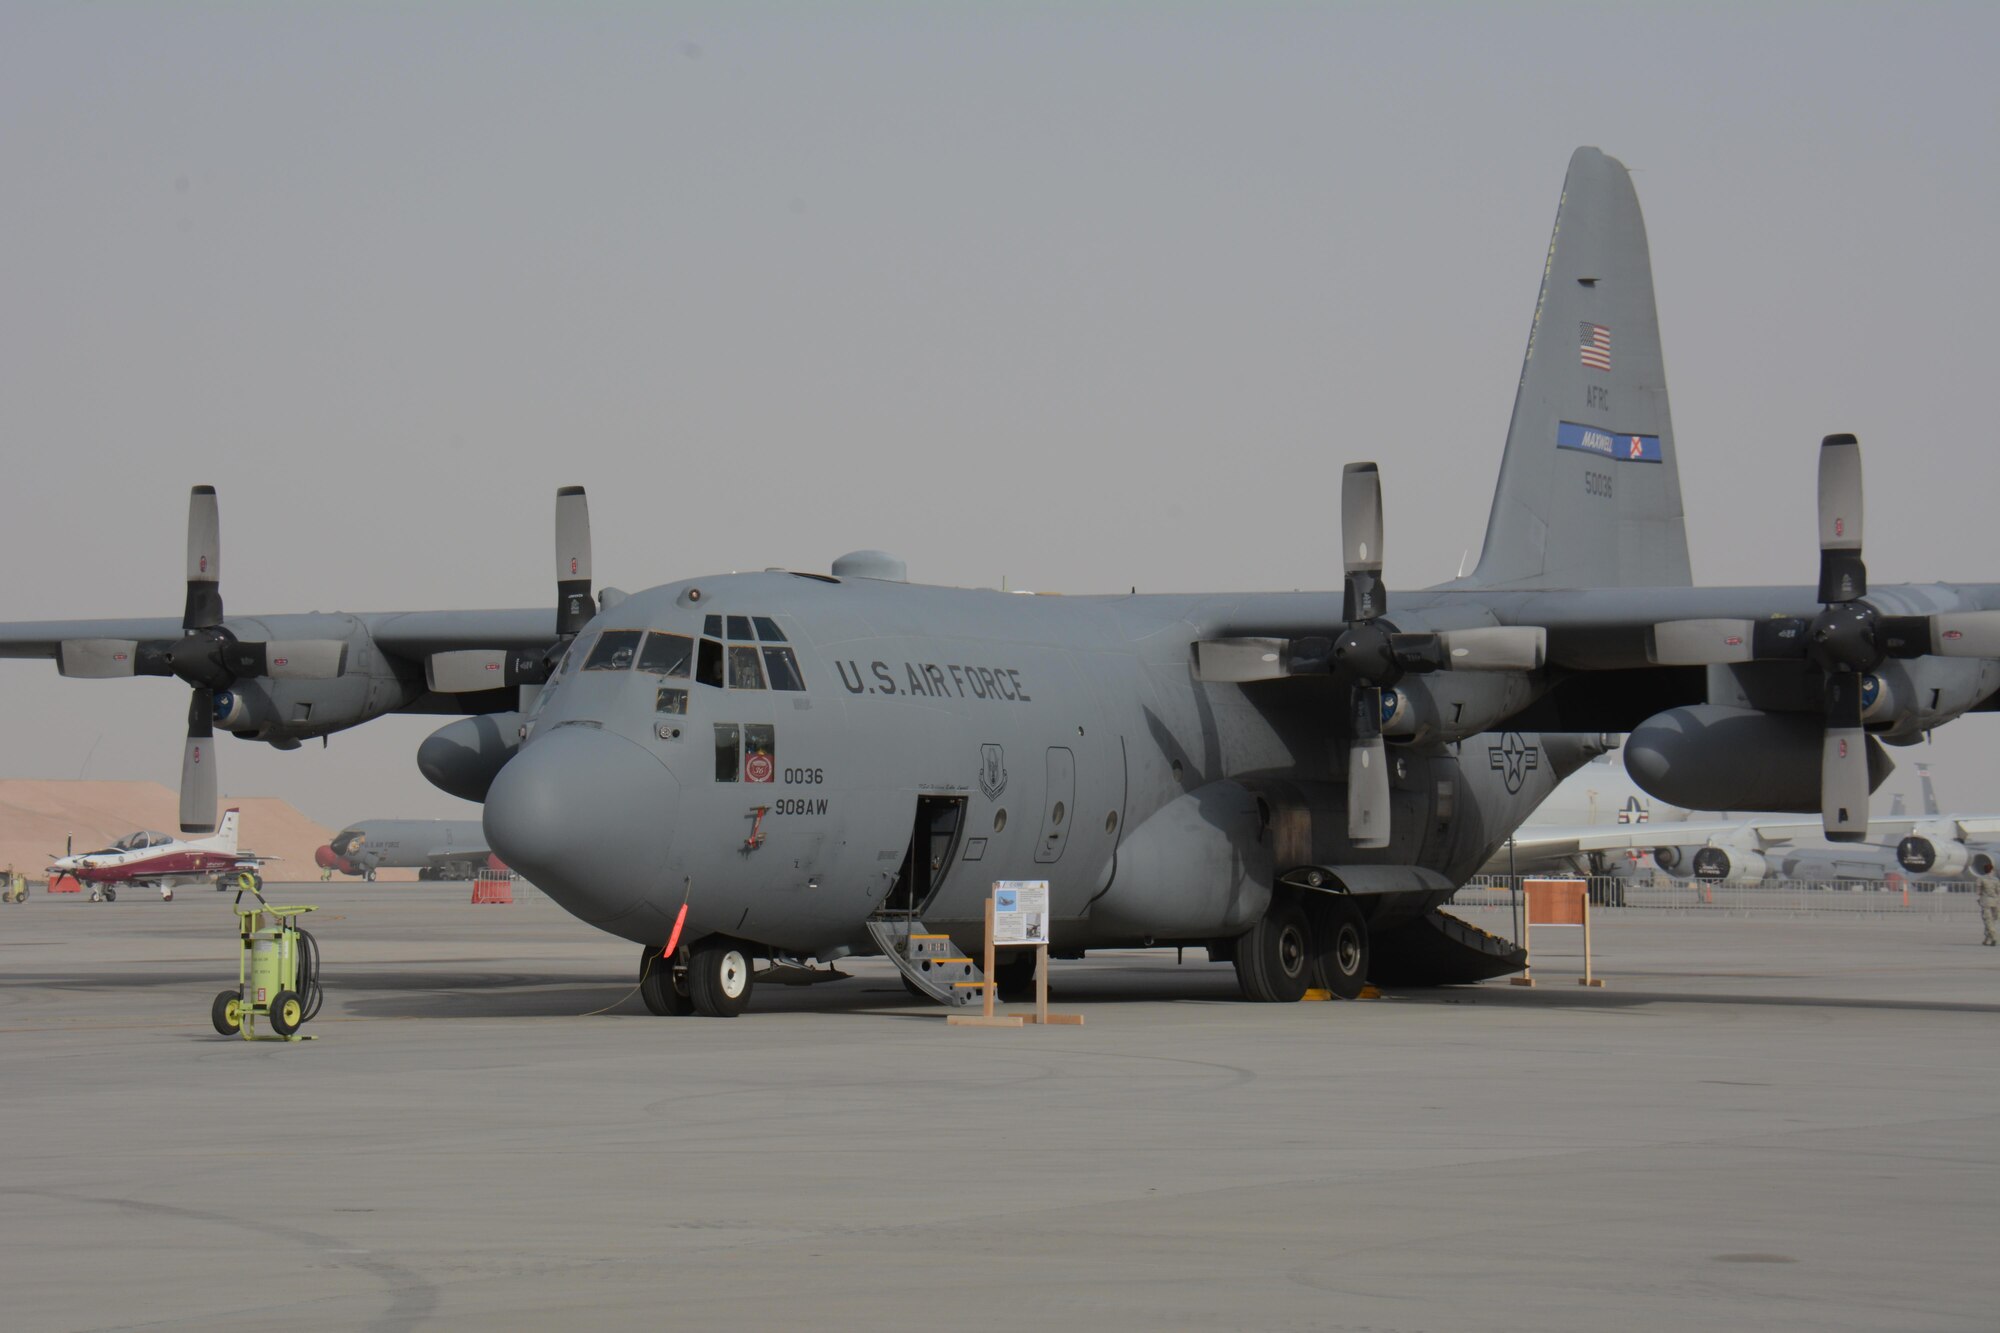 A C-130 Hercules from Maxwell Air Force Base, Alabama, waits for visitors at the annual Flight Line Fest Jan. 10 at Al Udeid Air Base, Qatar. The plane, which can take-off with a maximum weight of 155,000 pounds, was one of five U.S. Air Force aircraft on display during the event. Flight Line Fest is a joint partnership between the 379th Air Expeditionary Wing and Qatar Emiri Air Force to foster relations between Qatar and the United States. (U.S. Air Force photo by Tech. Sgt. James Hodgman/Released)